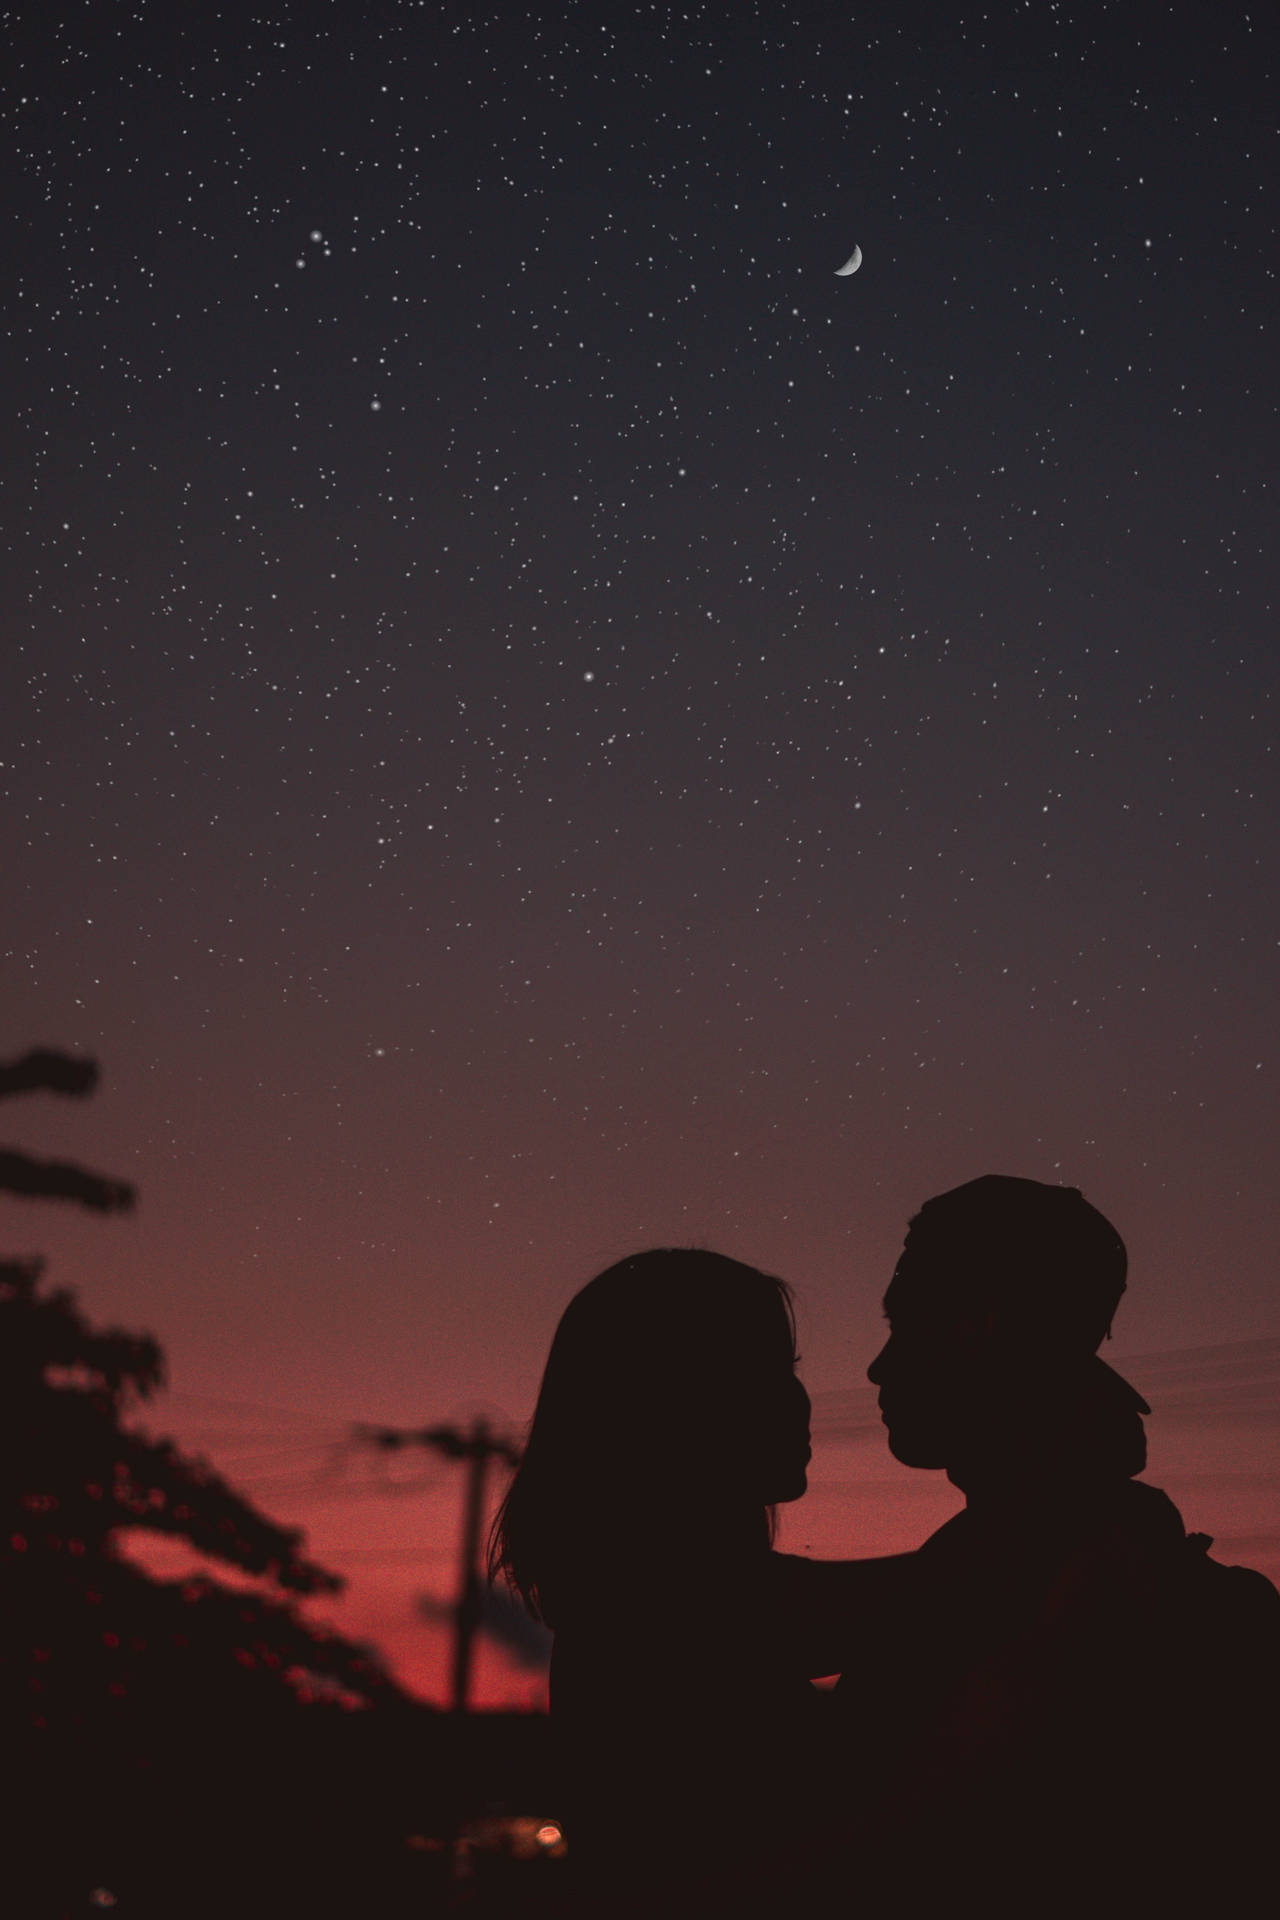 Couple Silhouette With Starry Night